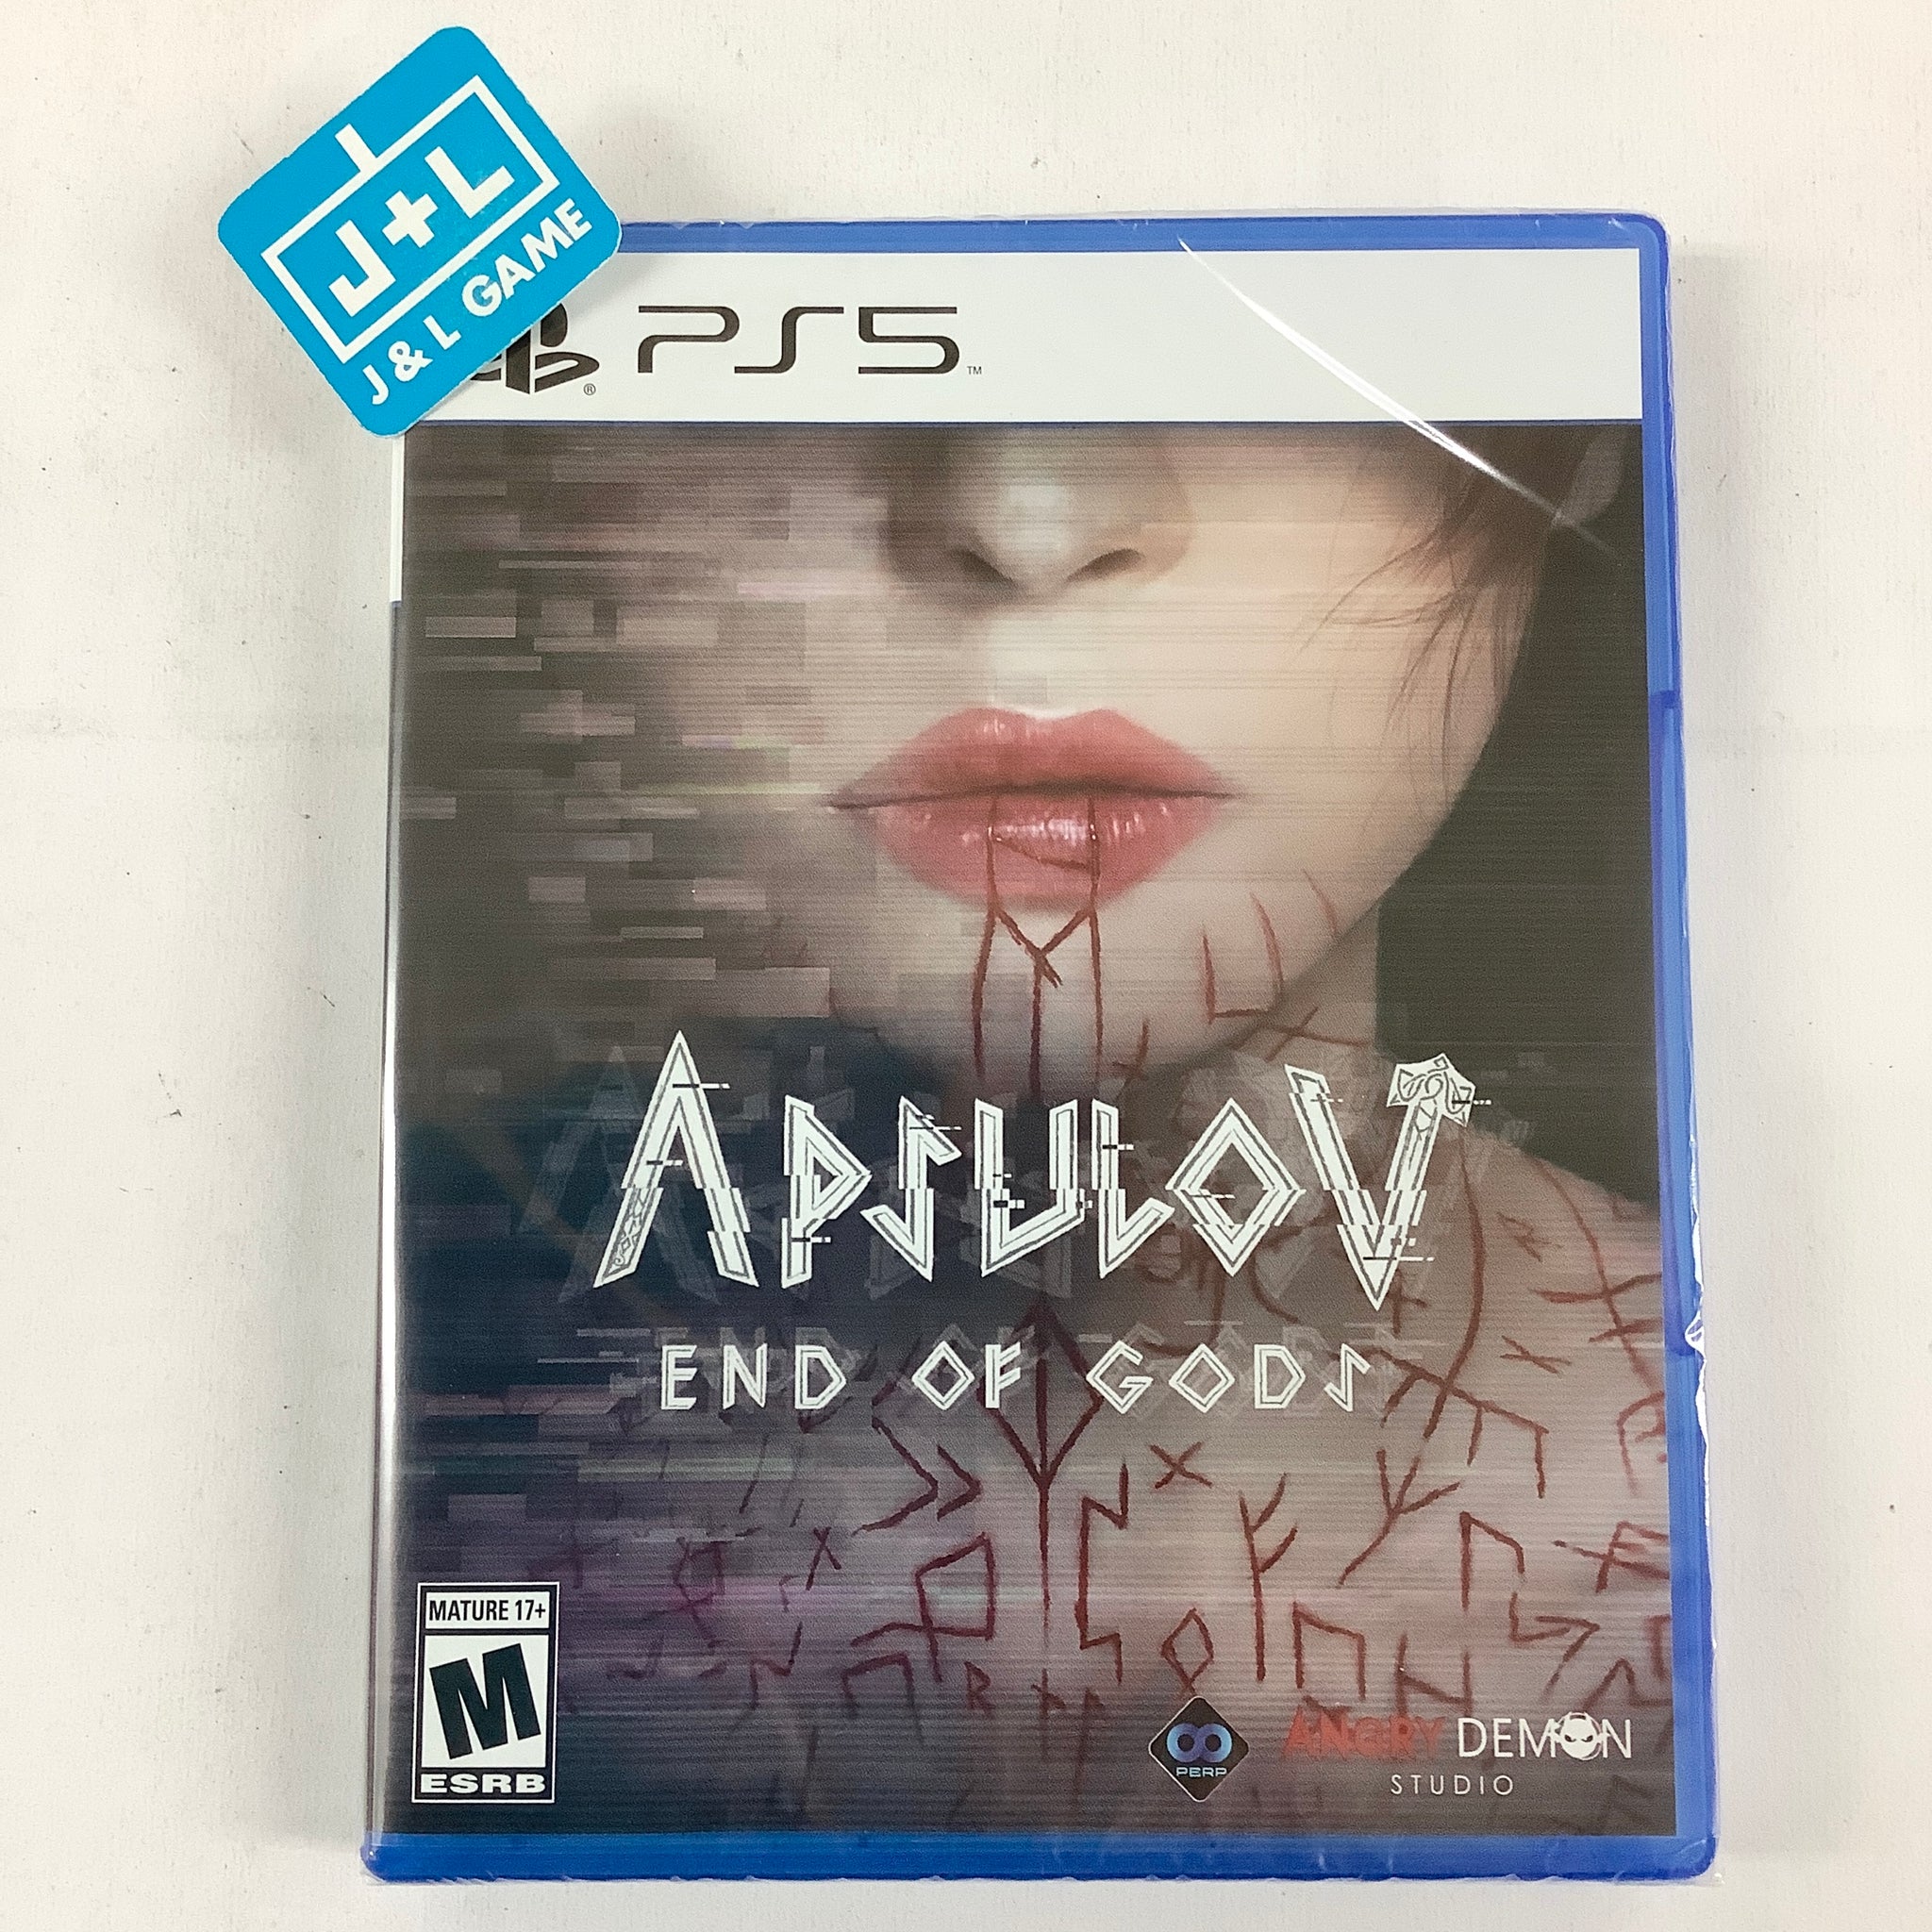 Apsulov: End of Gods - (PS5) PlayStation 5 Video Games Perpetual   